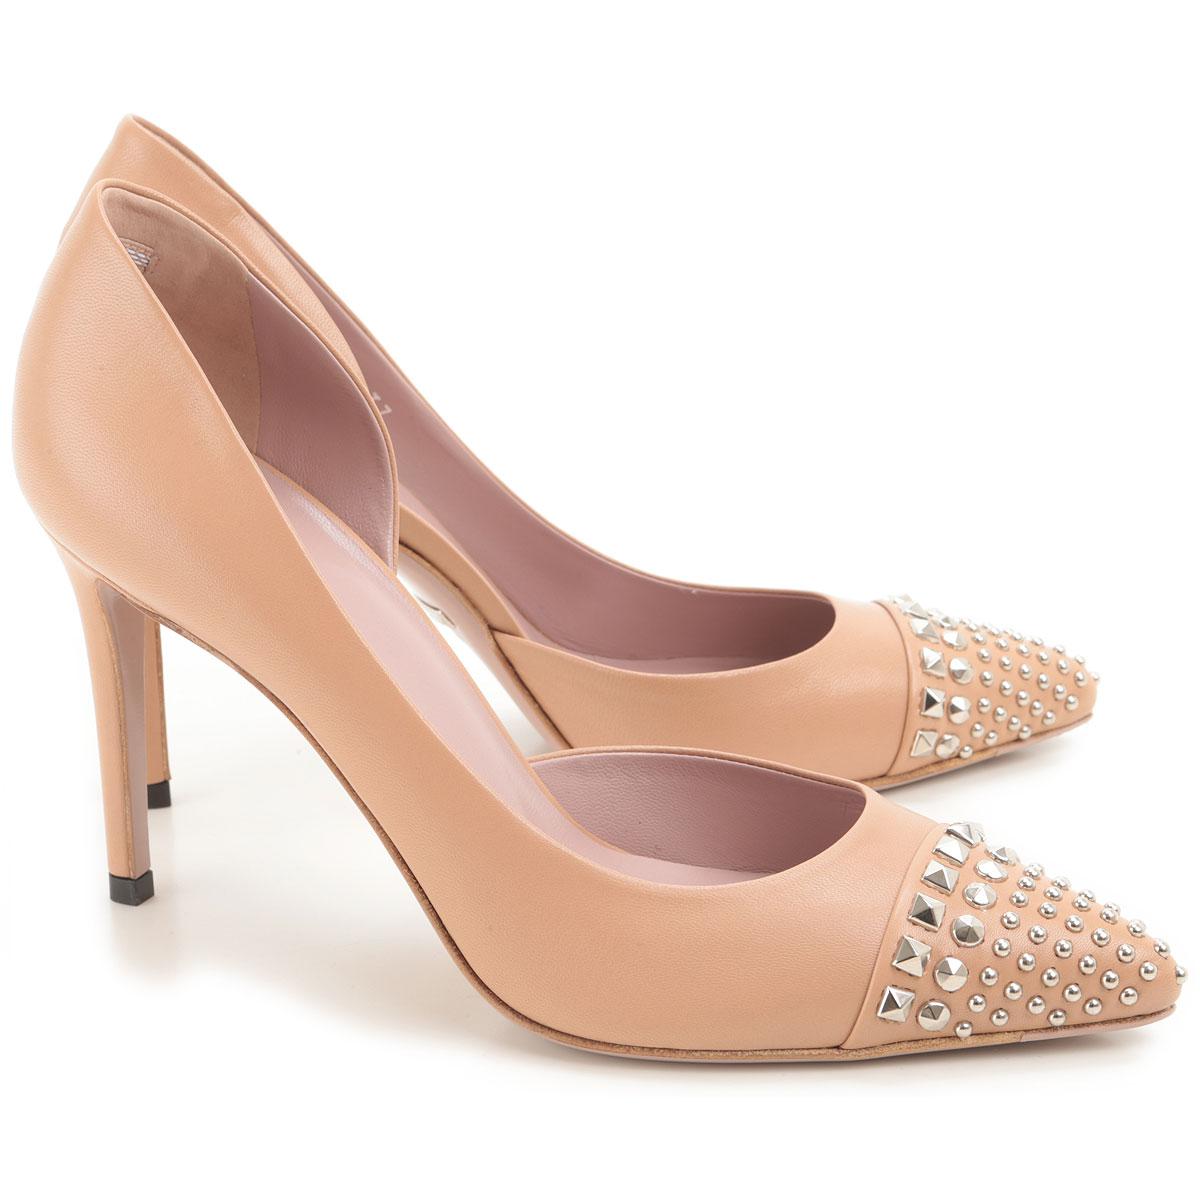 Gucci Pumps & High Heels For Women On Sale In Outlet in Pink - Lyst